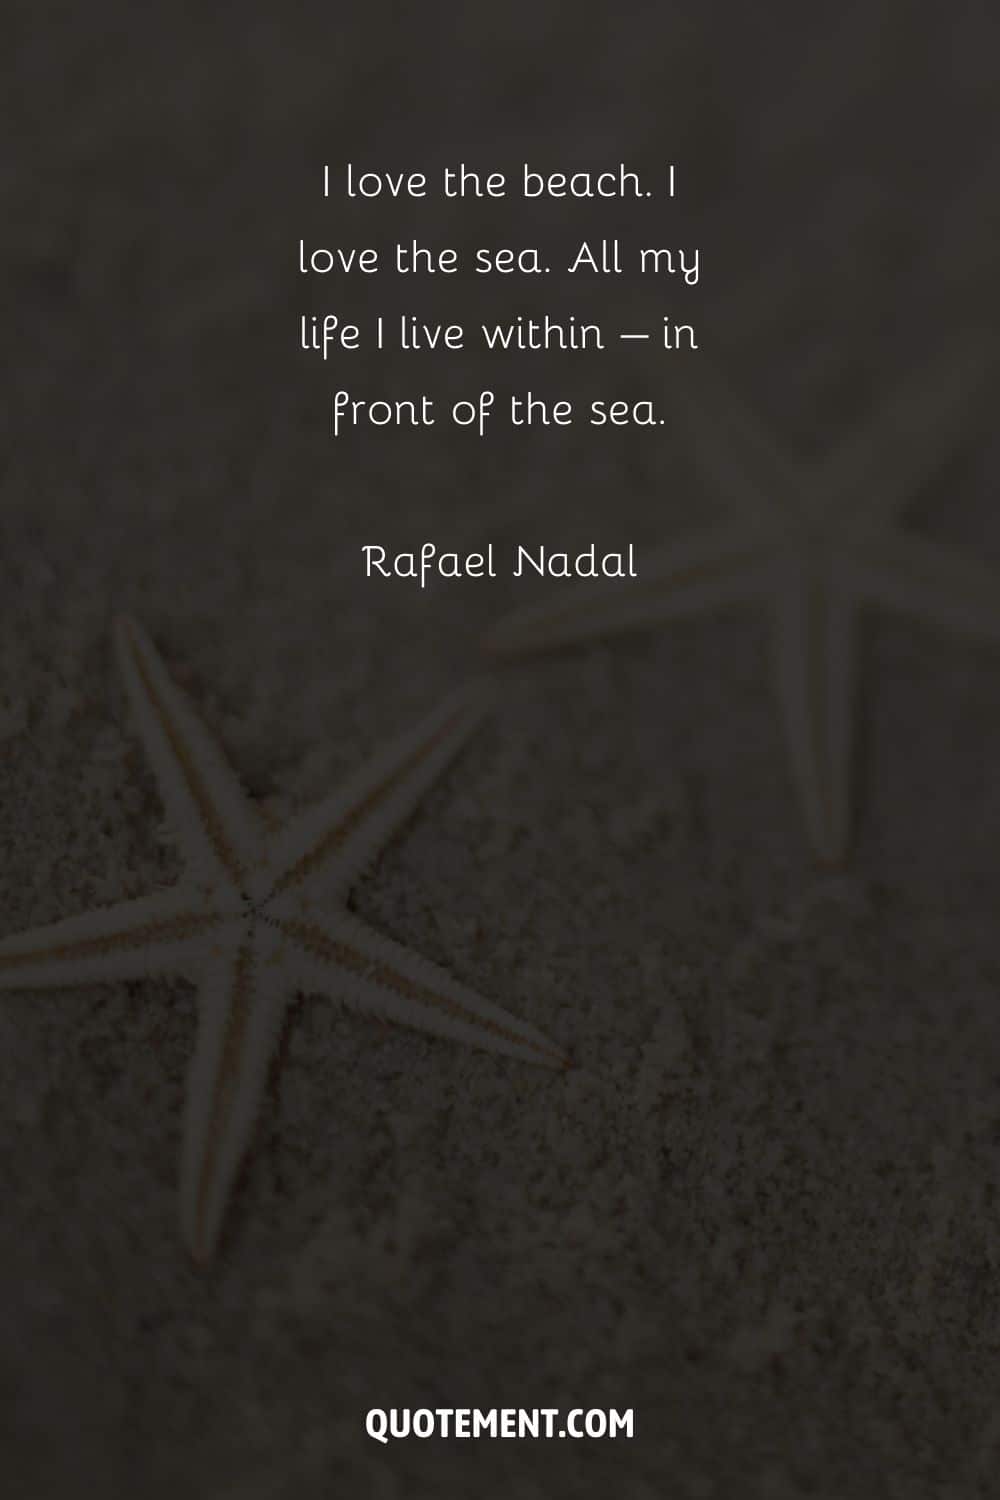 I love the beach. I love the sea. All my life I live within – in front of the sea. – Rafael Nadal